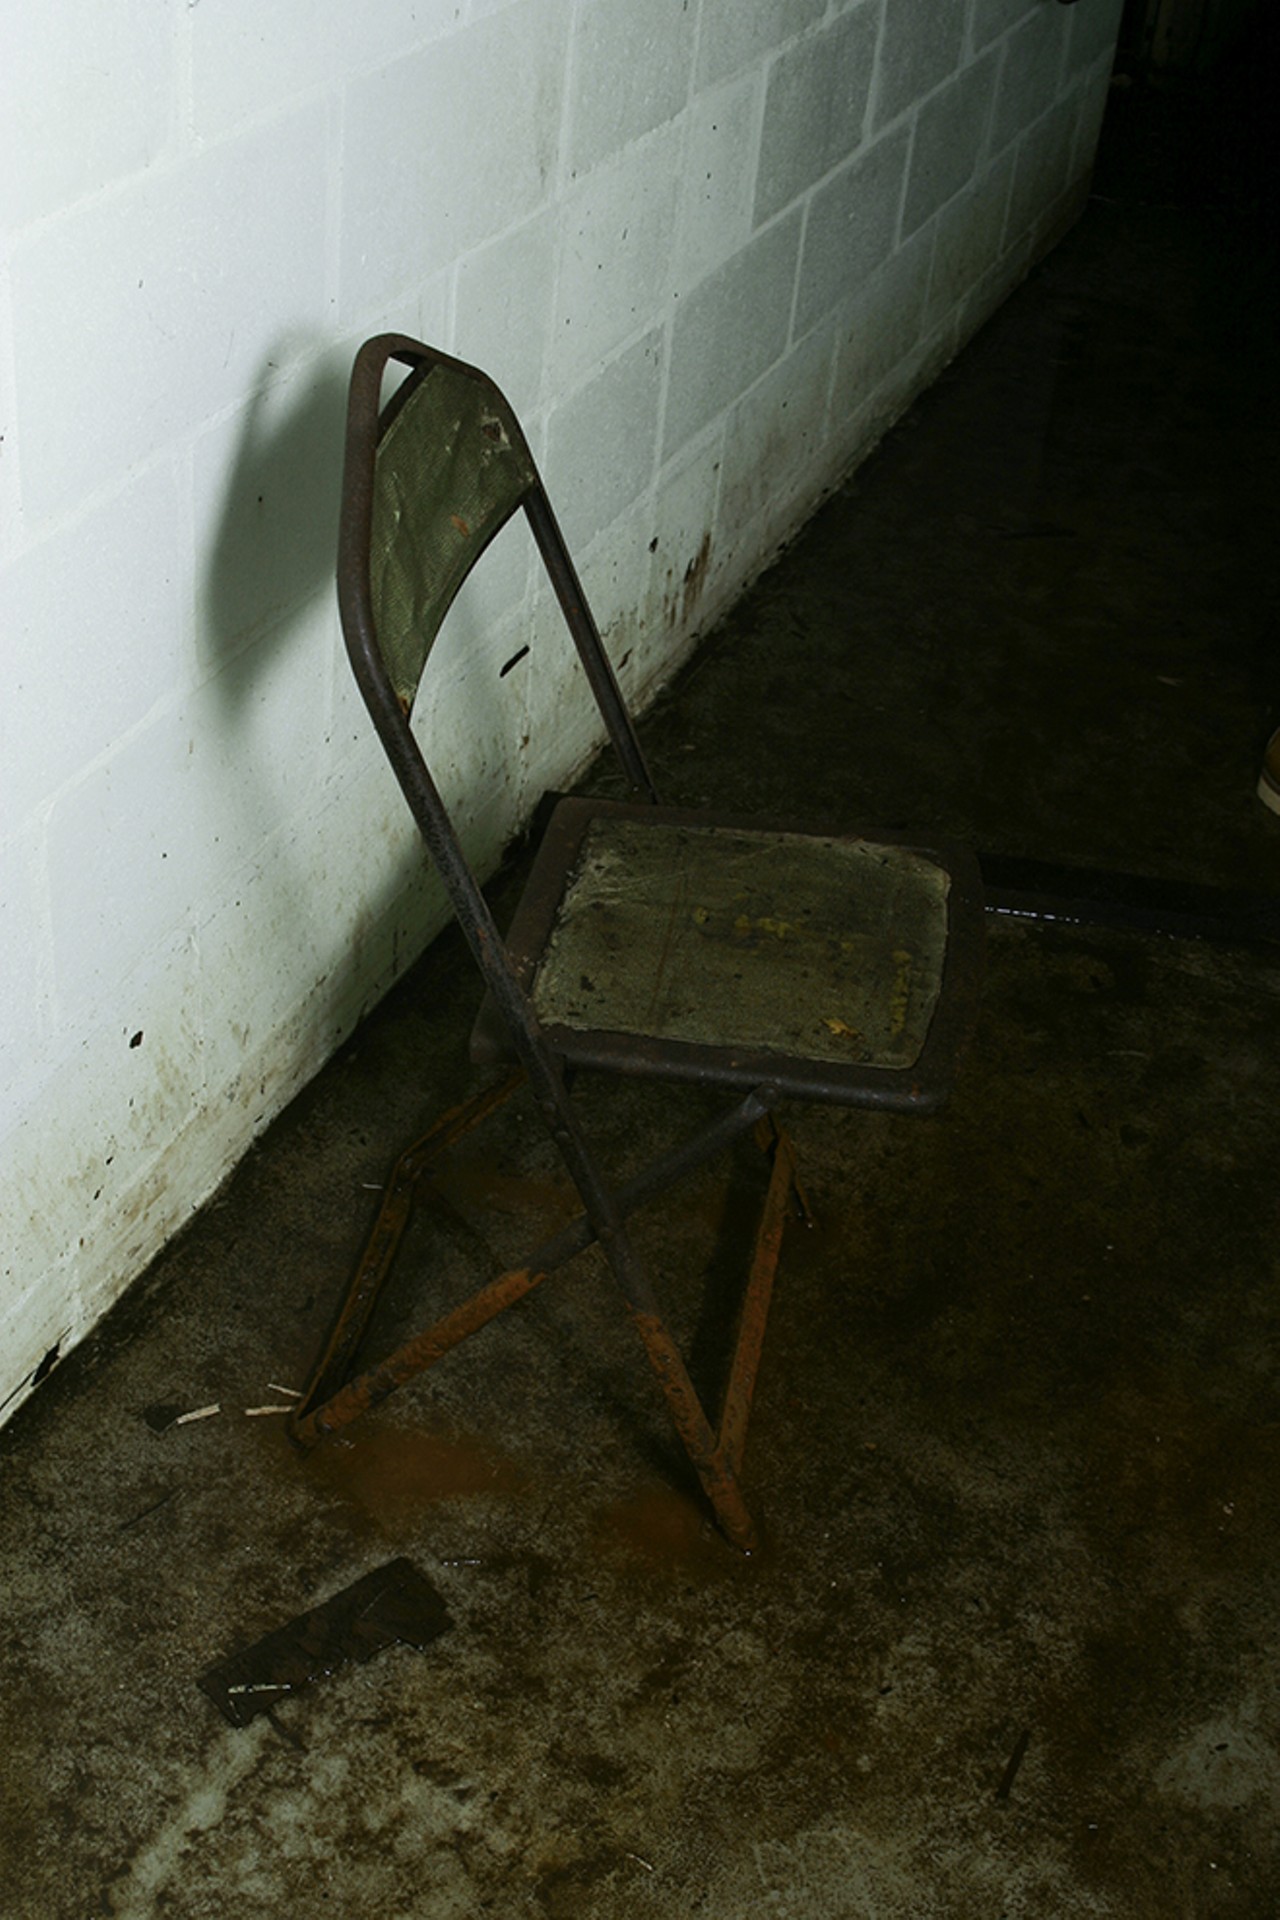 "You can see how this metal chair is slowly melting into the floor. "